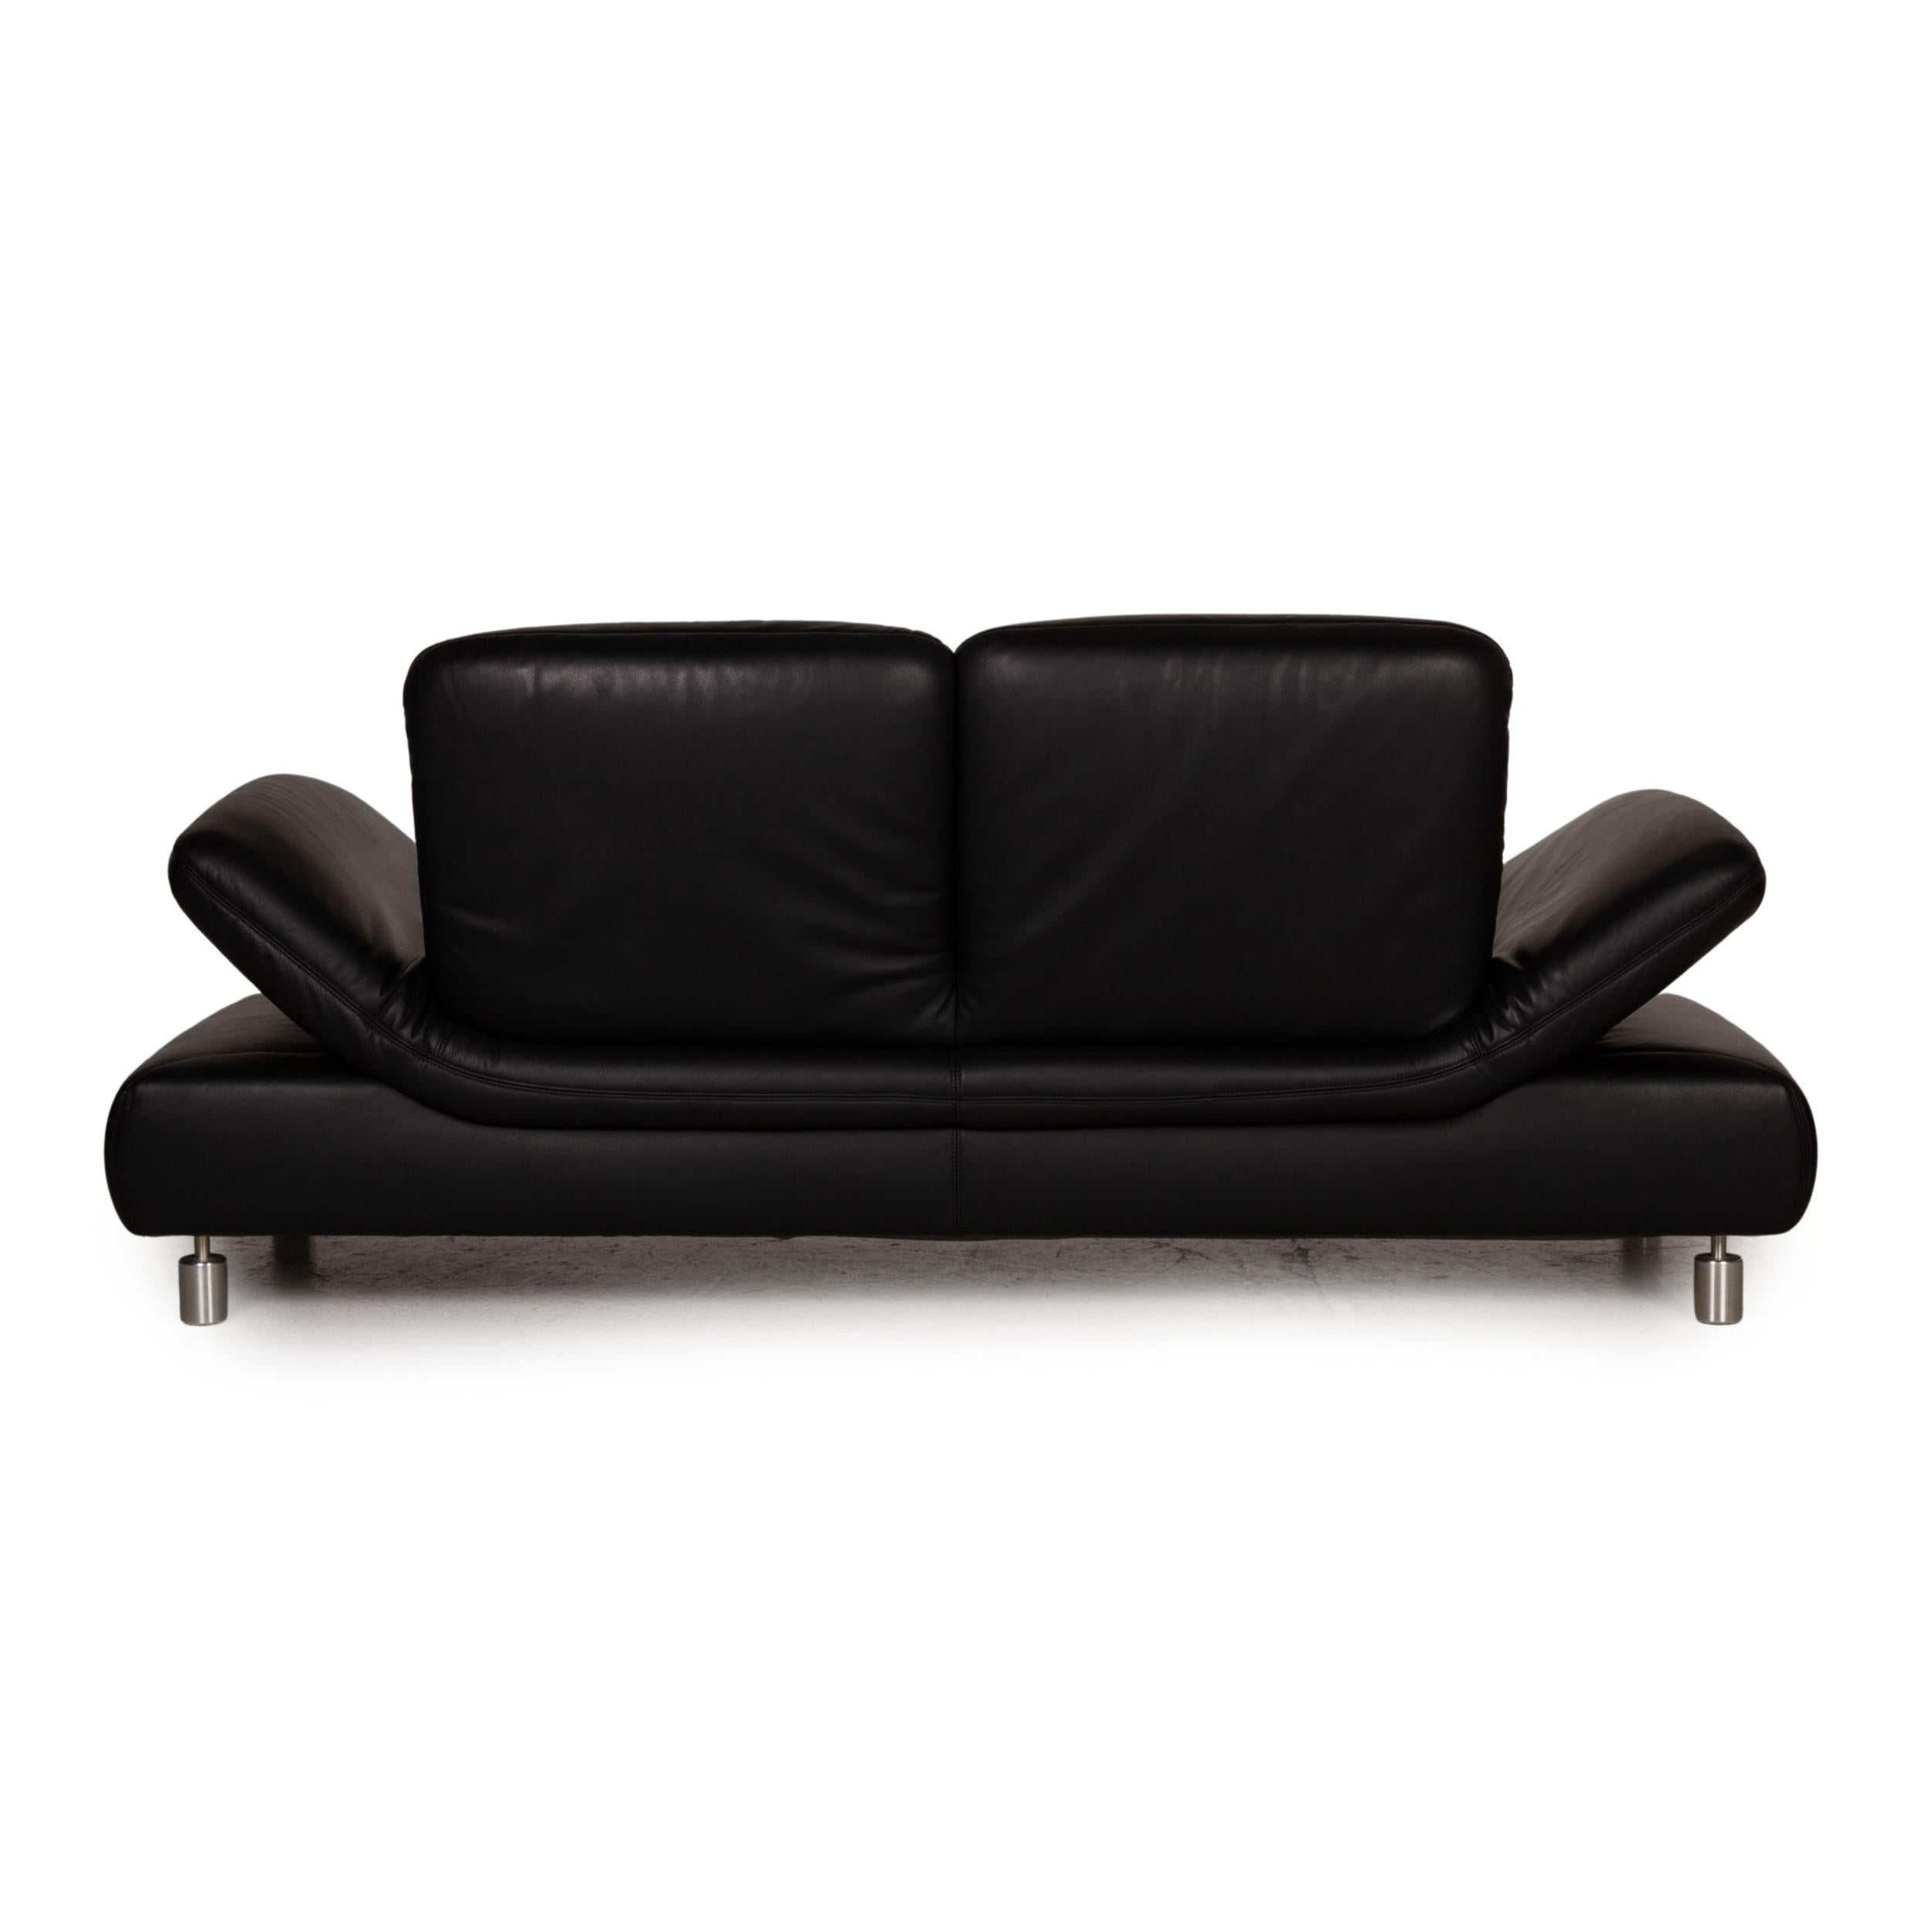 Koinor Rivoli Leather Sofa Black Two-Seater Couch Function 4